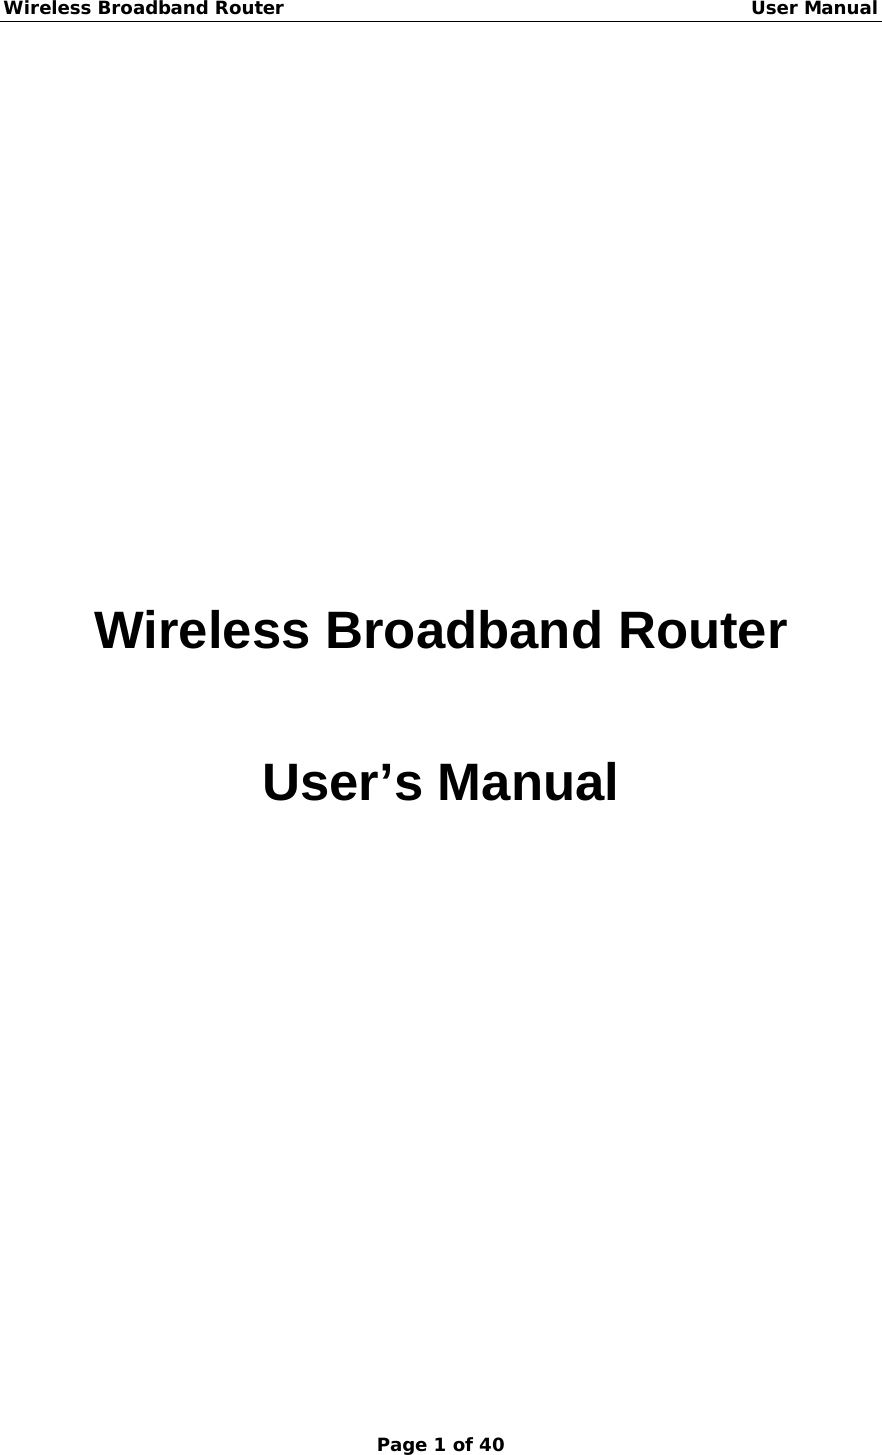 Wireless Broadband Router                                                   User Manual Page 1 of 40        Wireless Broadband Router  User’s Manual 